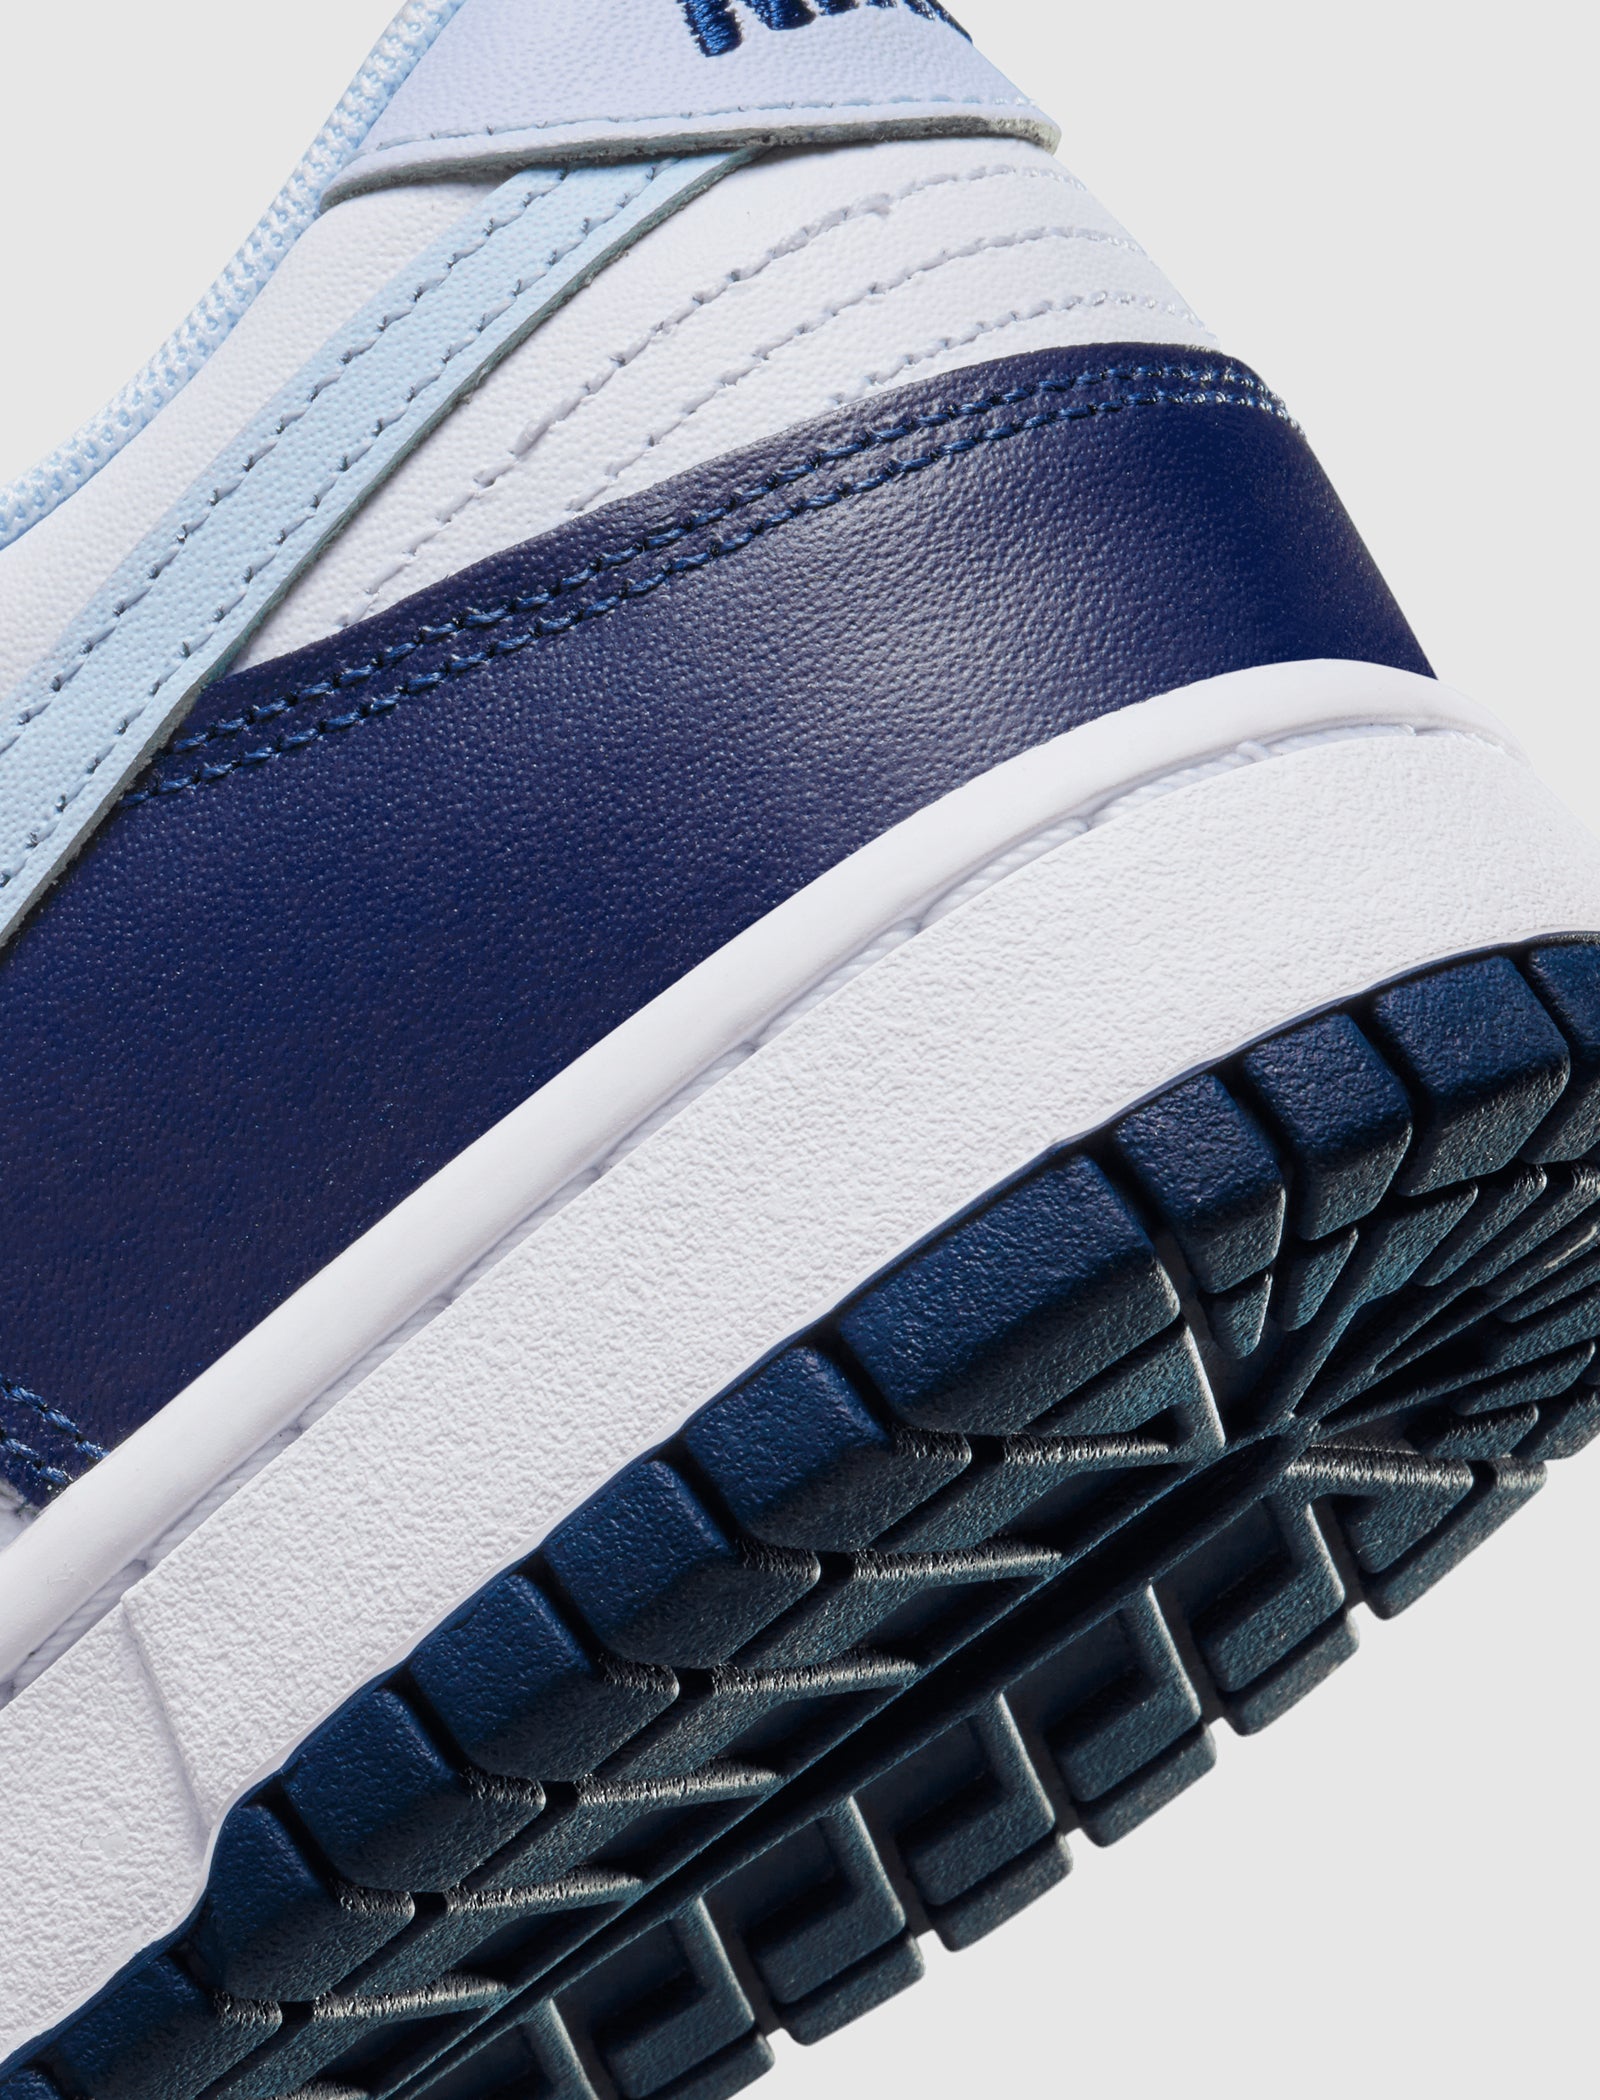 DUNK LOW "GAME ROYAL/MIDNIGHT NAVY"